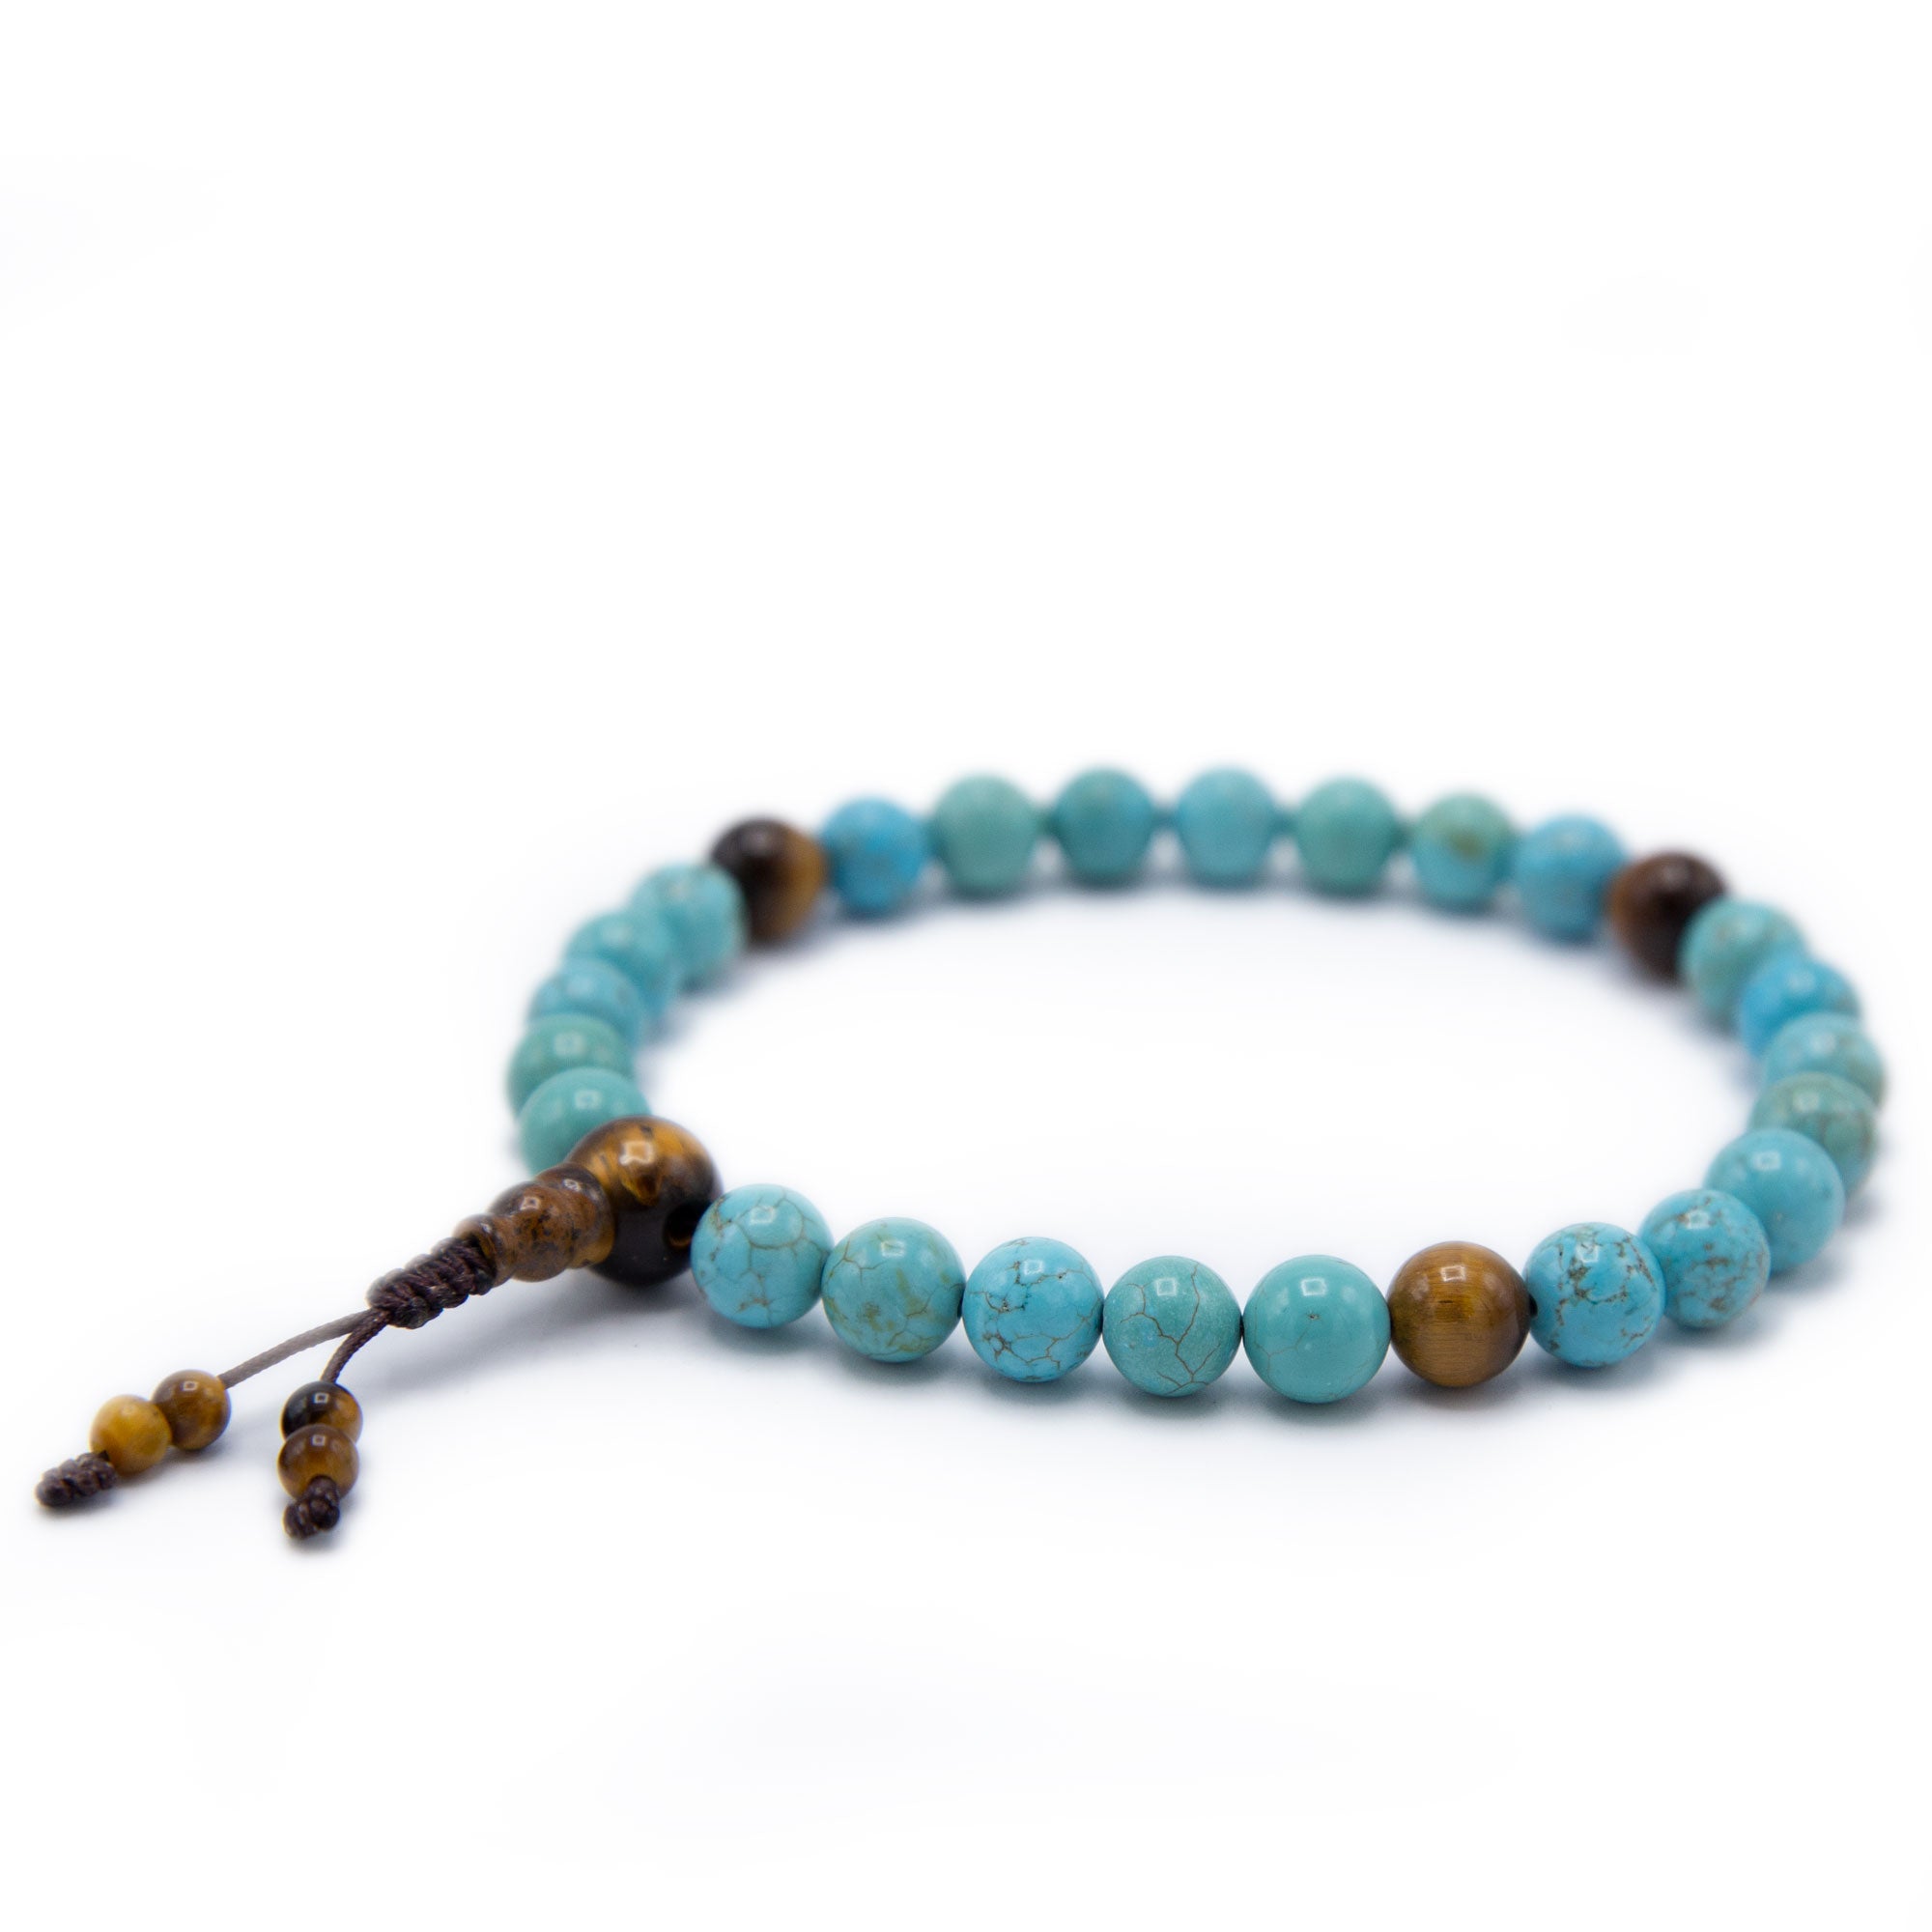 Turquoise and Tiger's Eye Pocket Mala - 8mm